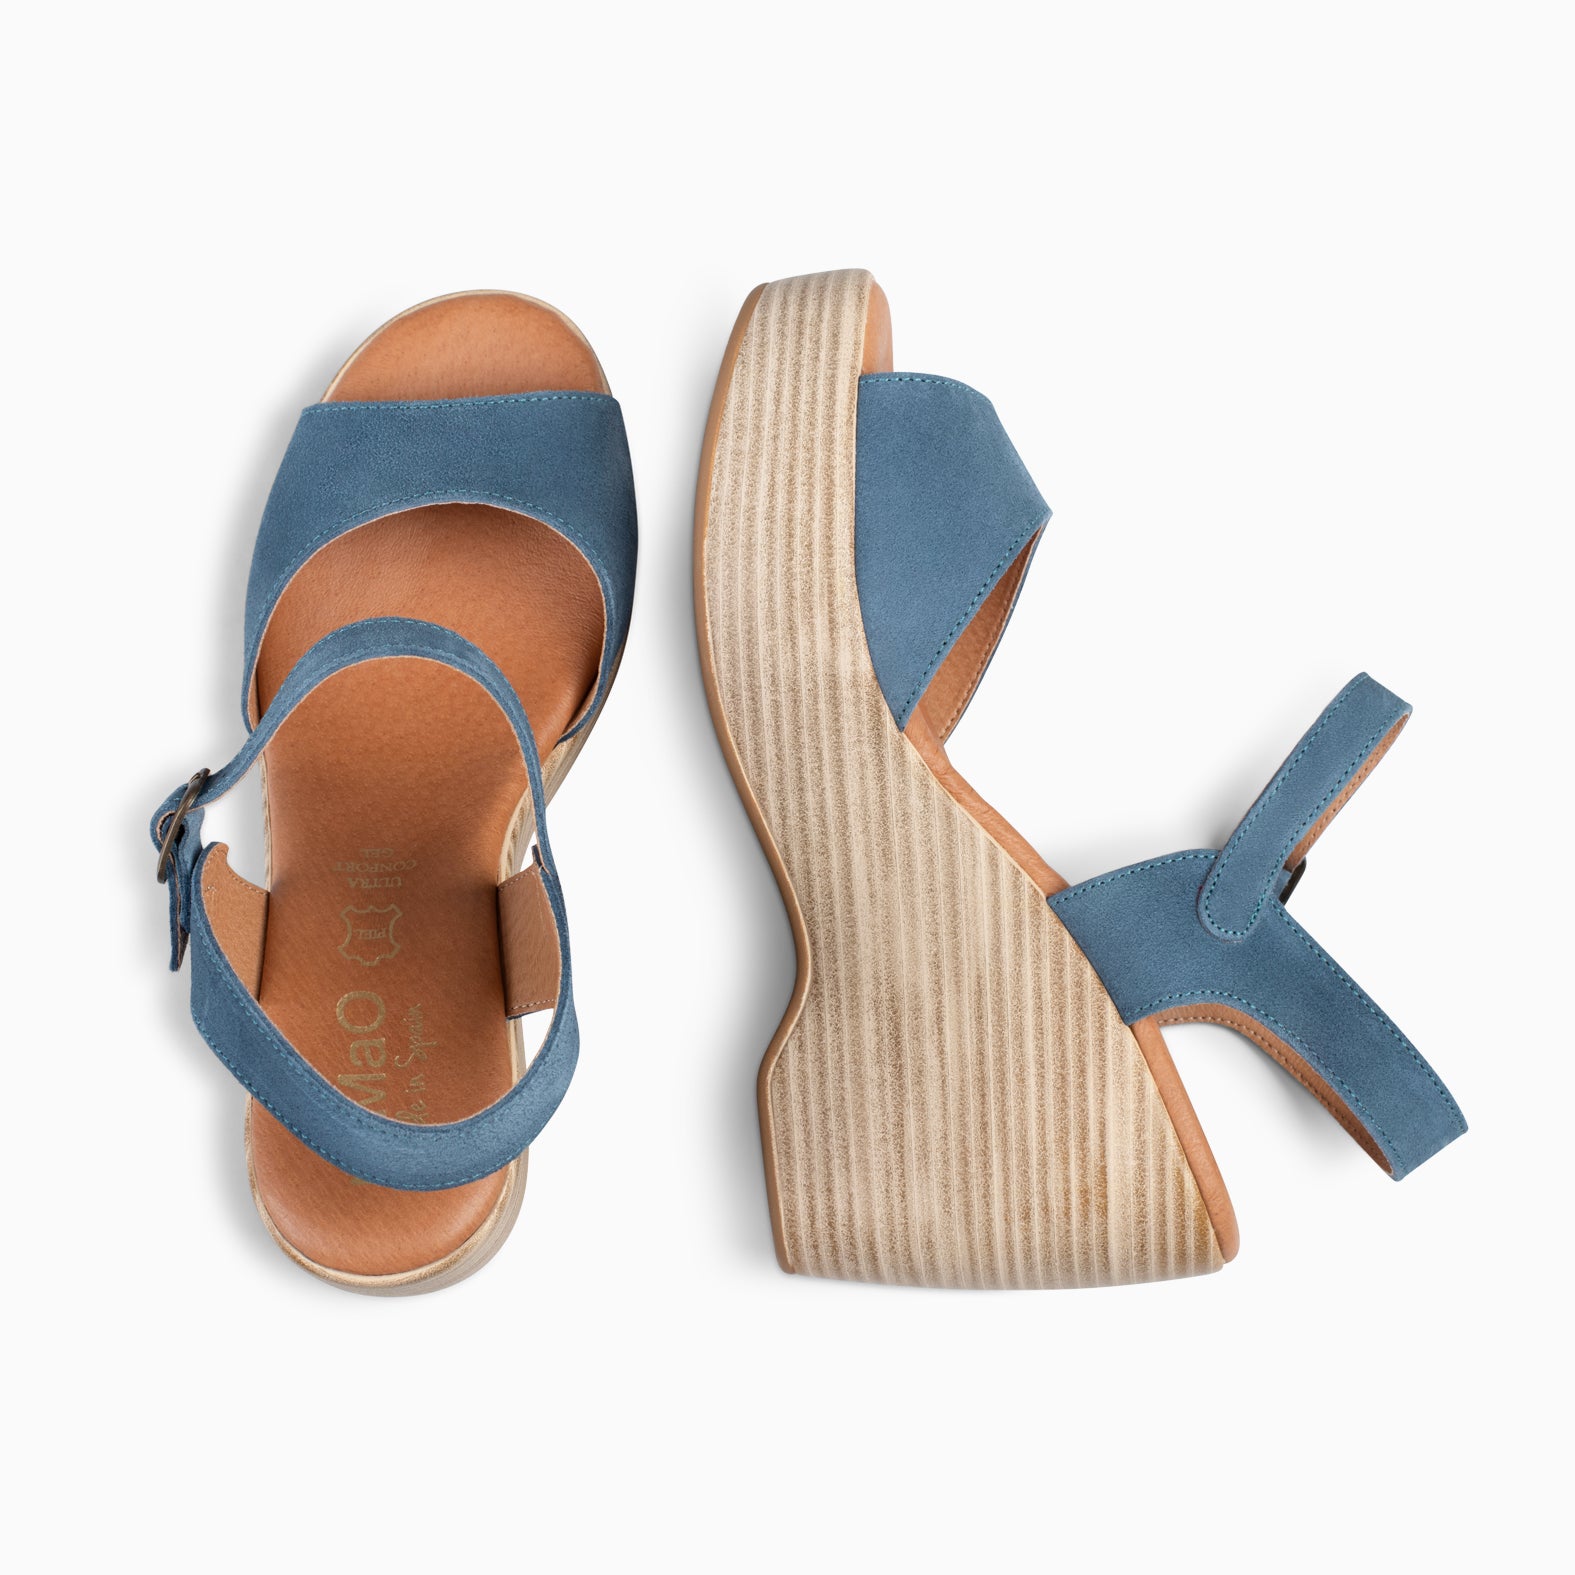 SIDNEY – JEANS wedge sandals